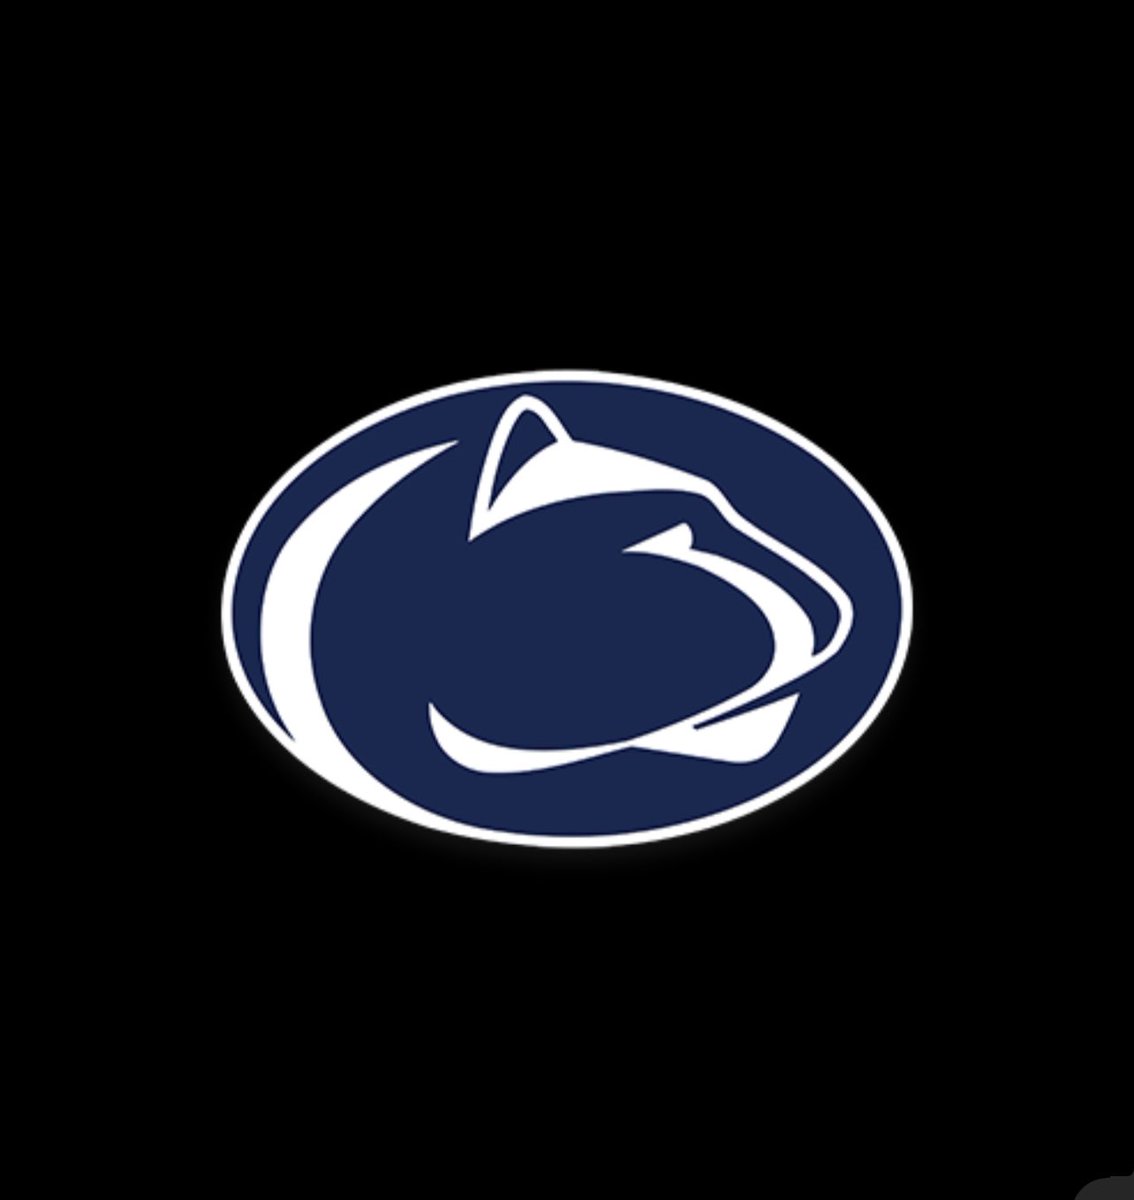 Blessed and thankful to receive my first P5 offer from @PennStateFball @coachmhagans @shadrich80 @CoachAhmadPSU #WeAre @CBASyrFootball @brucewill15 @RealCoachBruno1